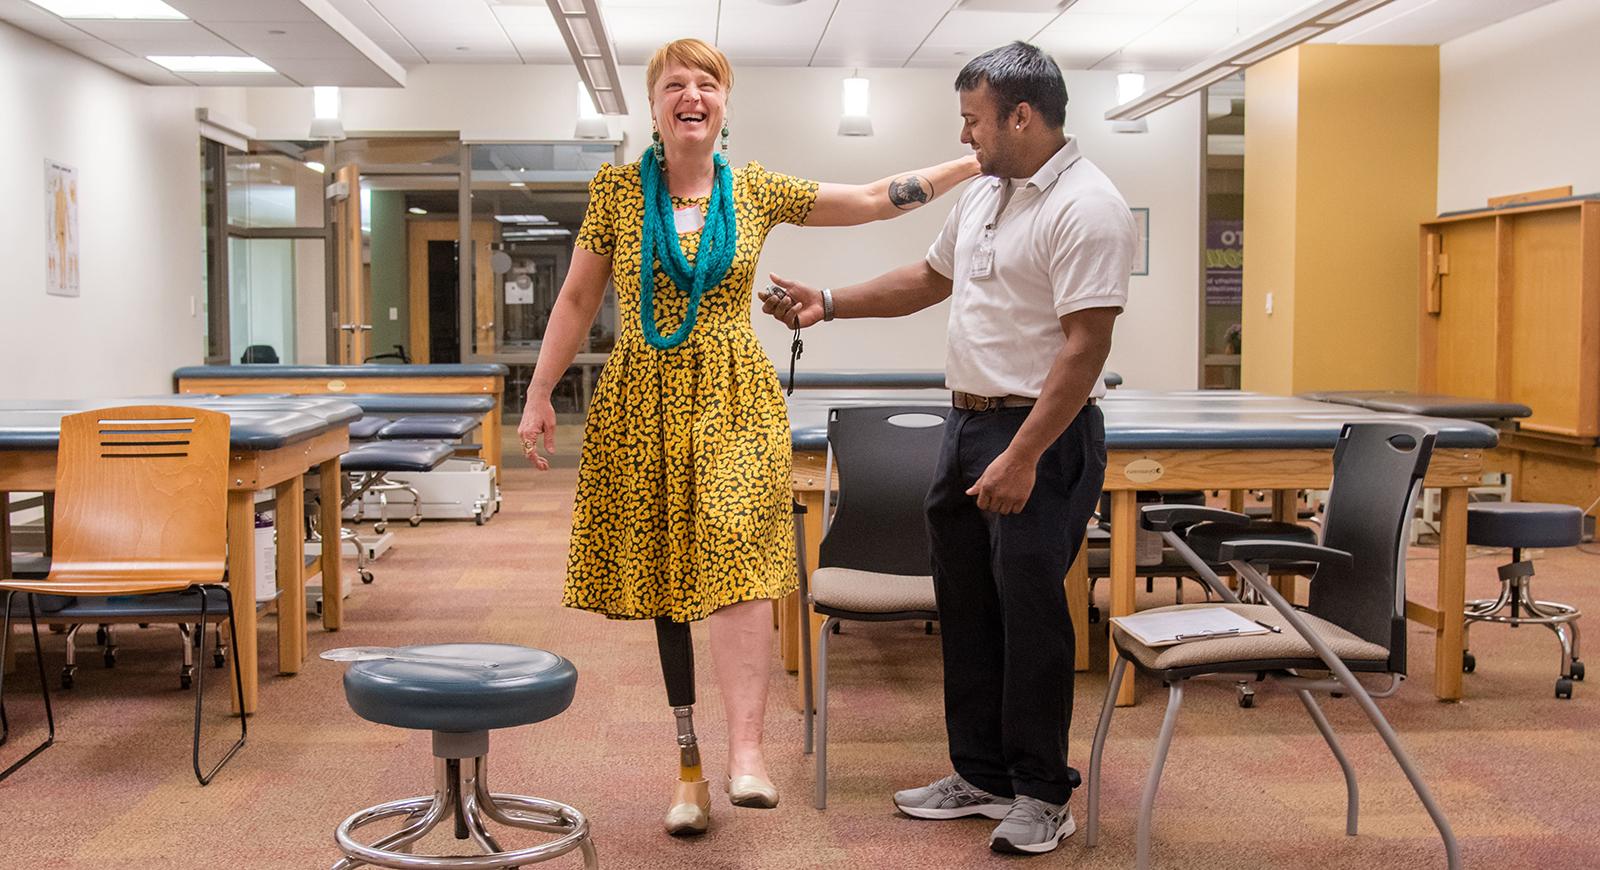 Photo of a physical therapy student helping a woman with a prosthetic leg